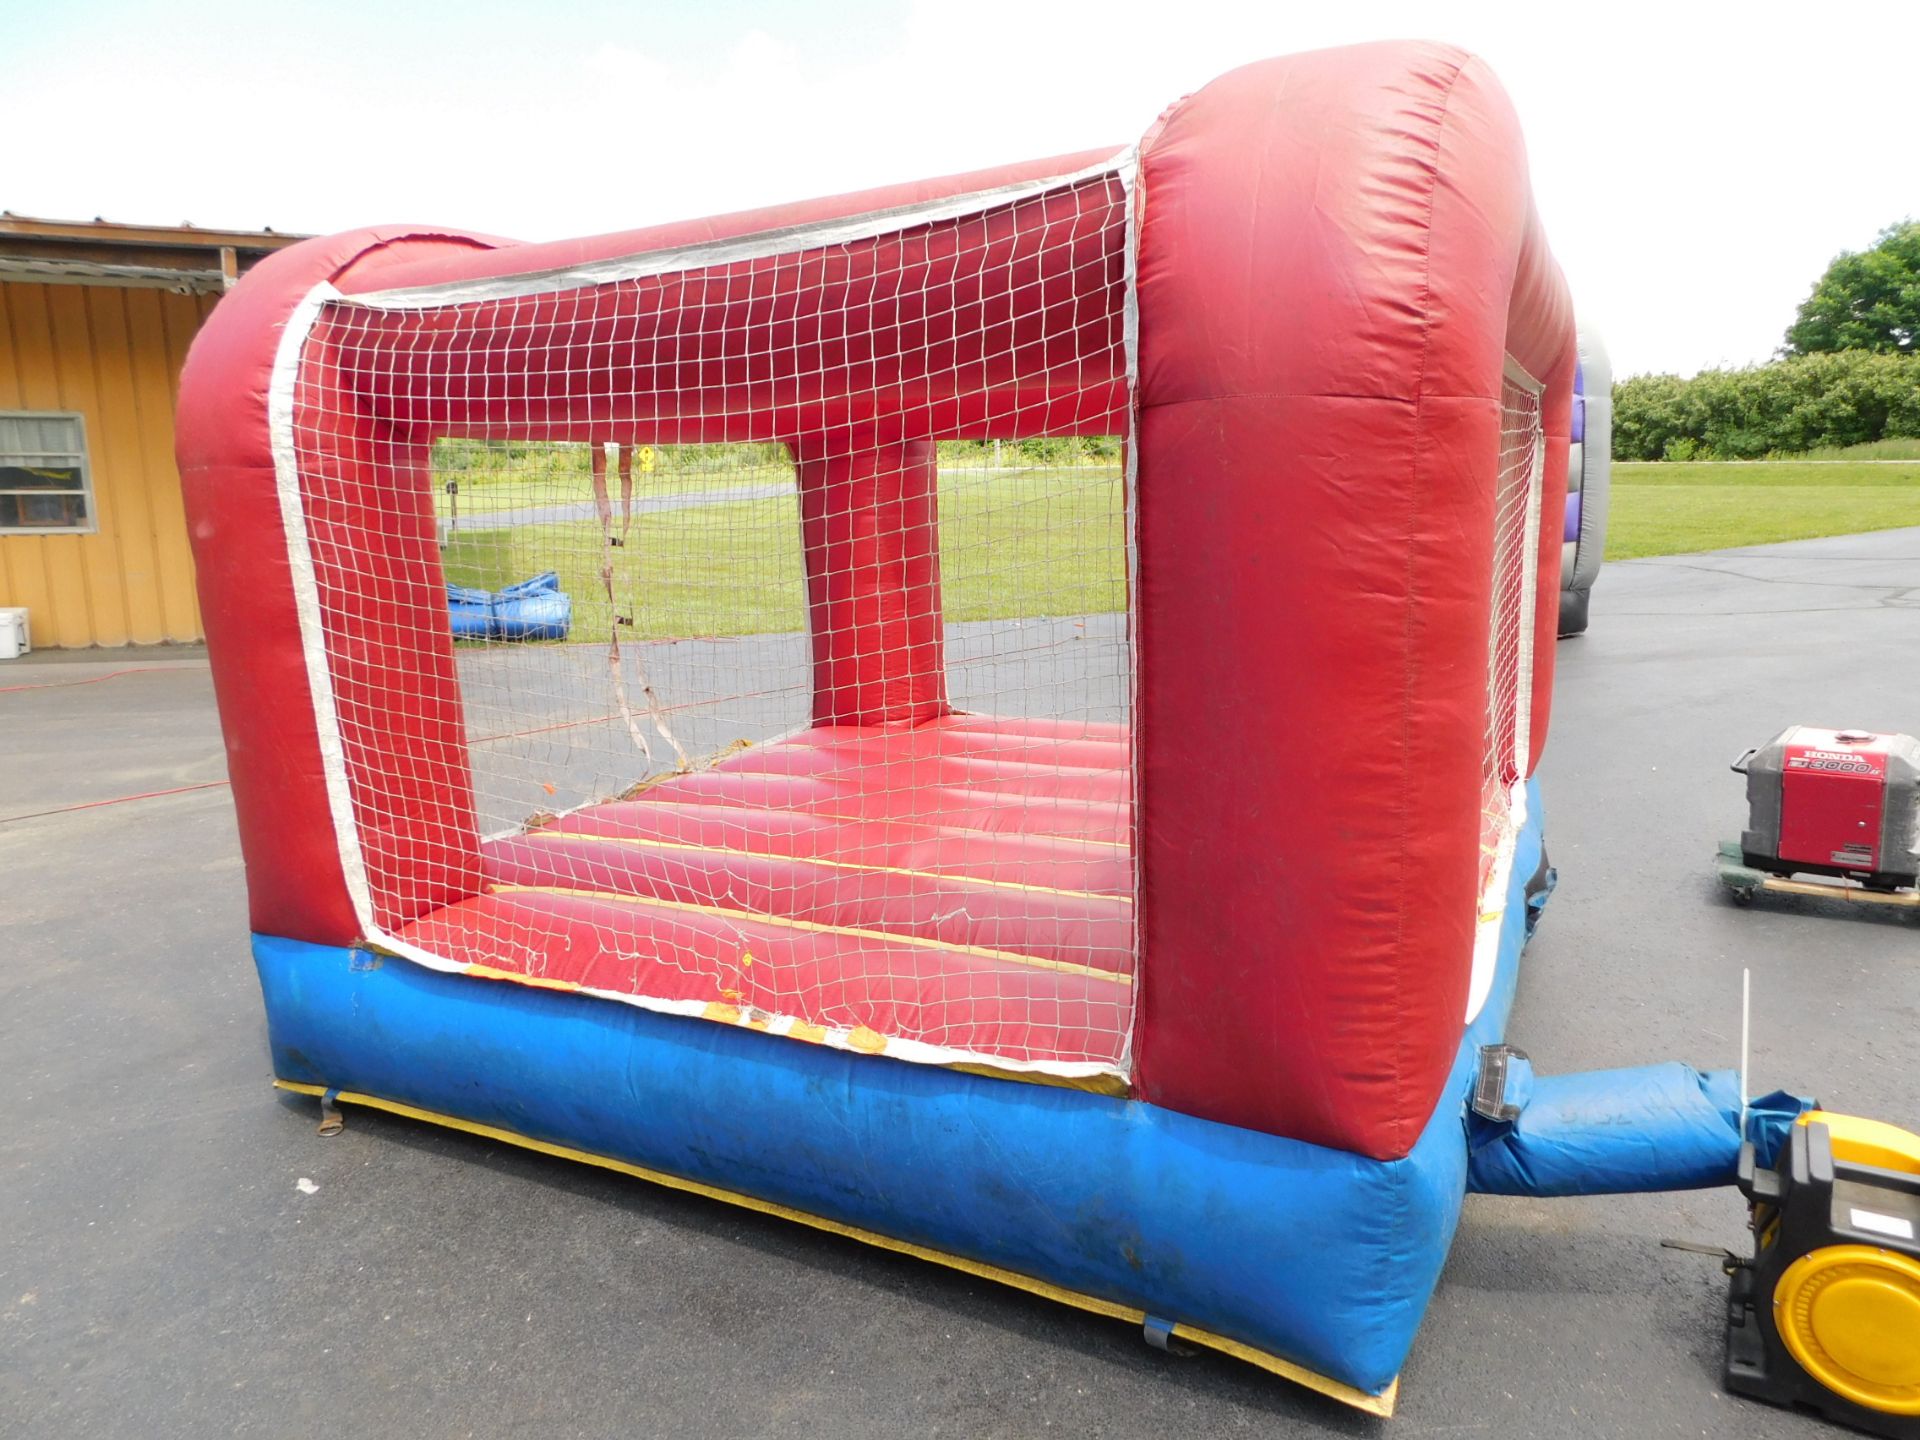 Inflatable Fun Service Bounce House, 1pc. 1 Blower required, Junior Jumper 11'WX11'LX9'H #104 - Image 3 of 12